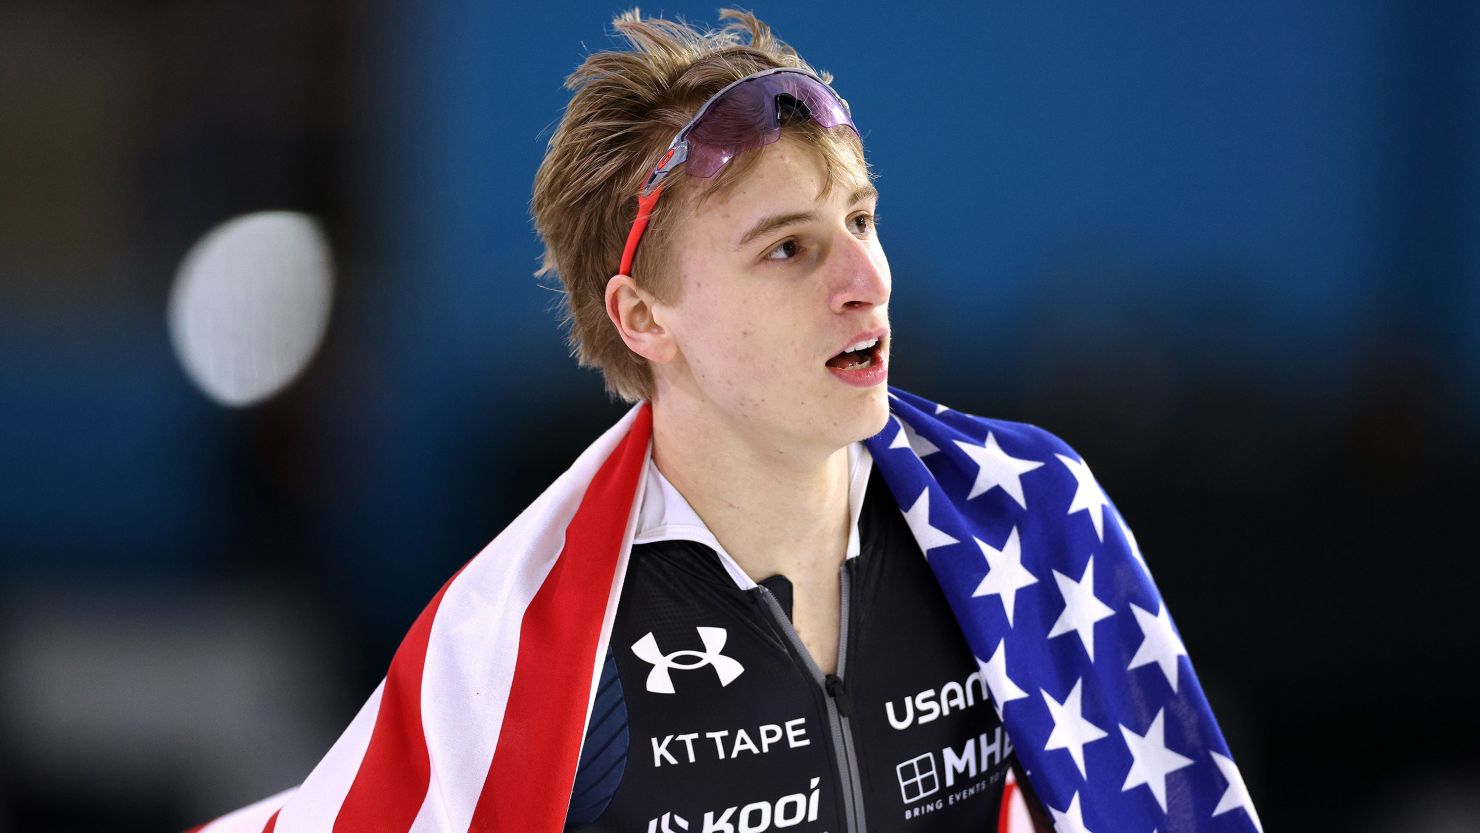 Stolz was the youngest member of Team USA at last year's Winter Olympics.